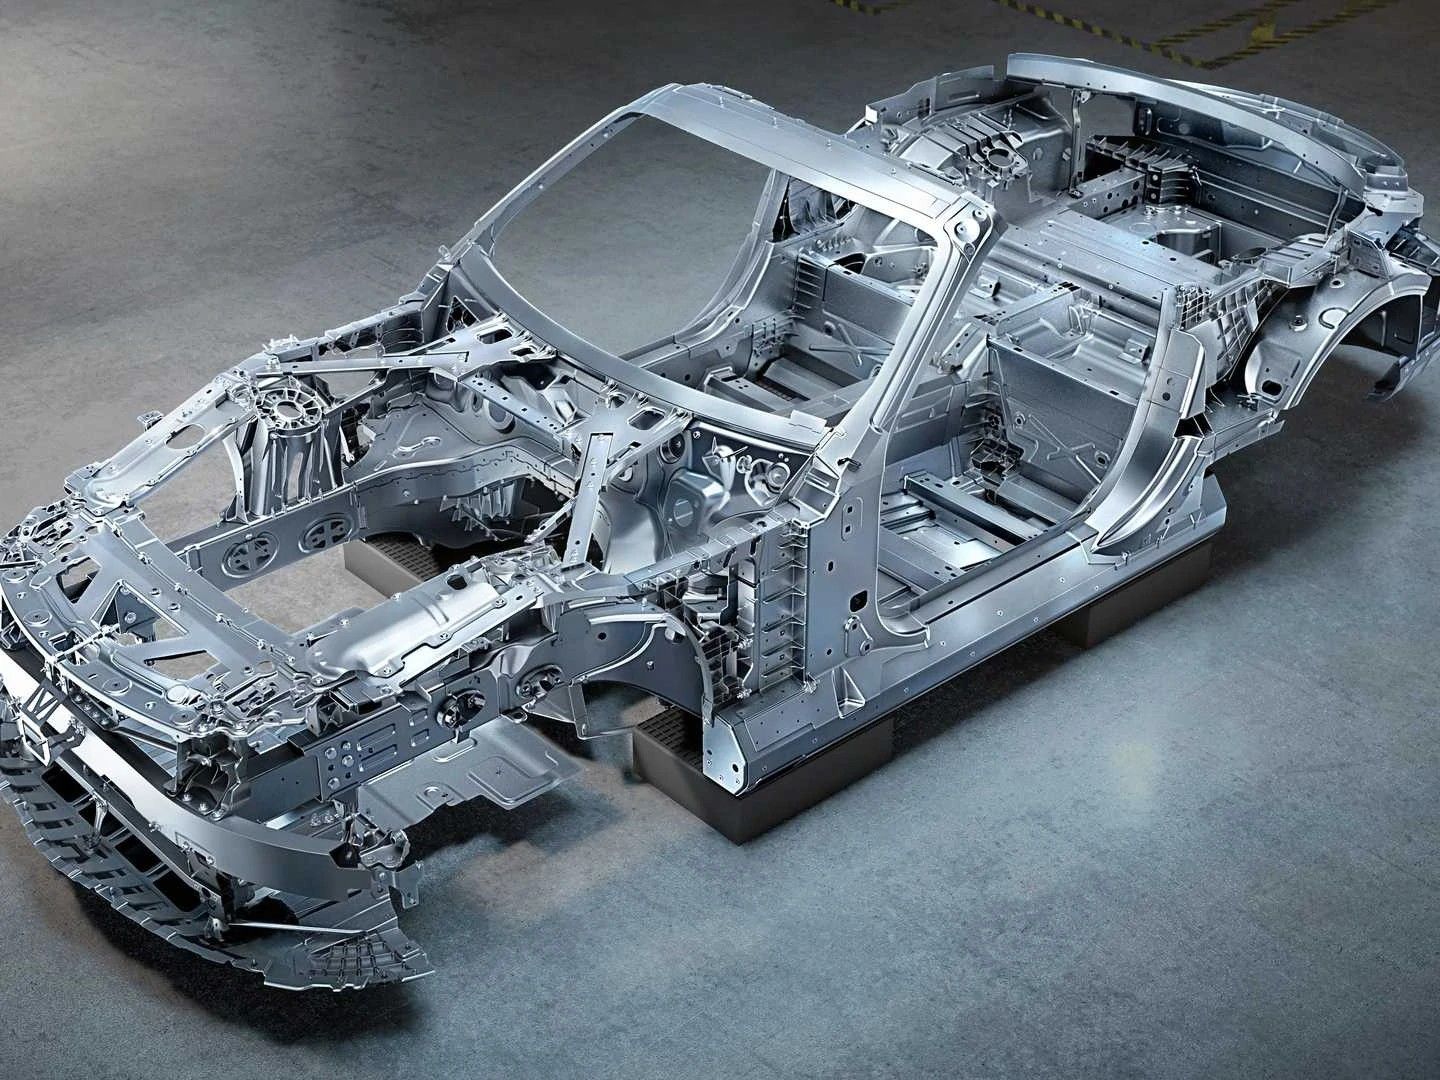 An Image Of Mercedes-AMG SL's Chassis